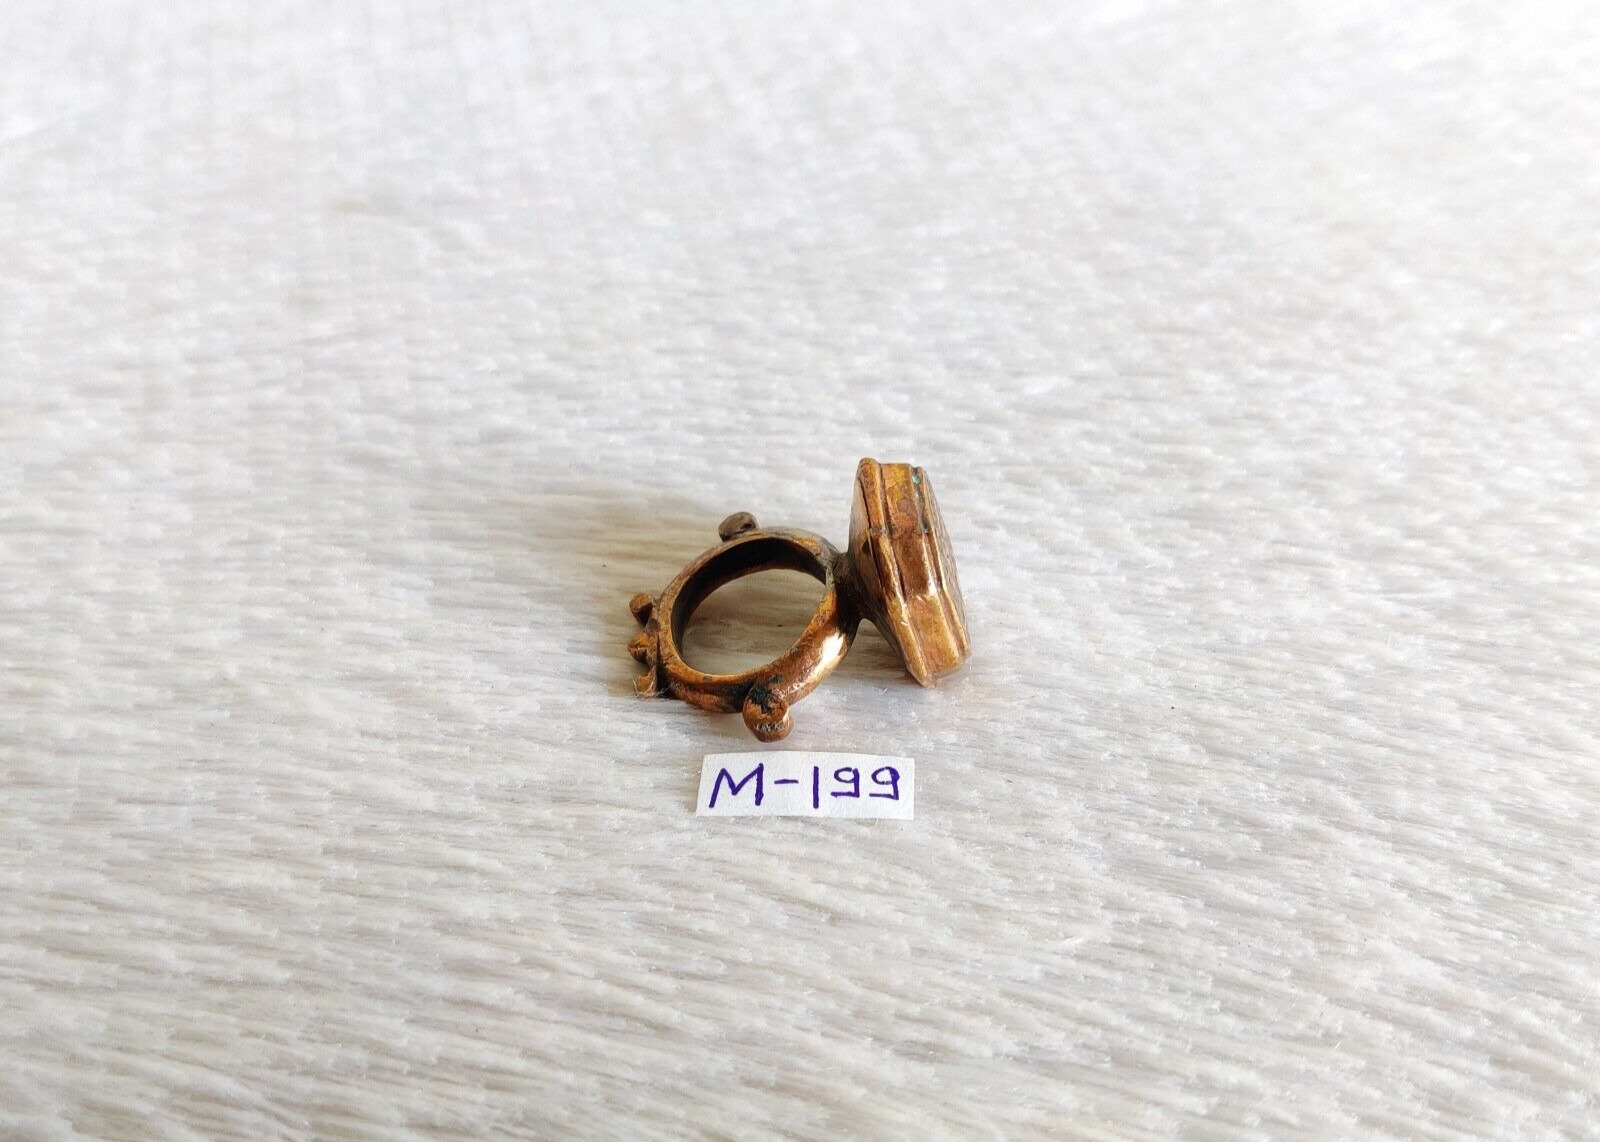 19c Vintage Original Old Islamic Calligraphy Copper Ring Jewelry Props M199